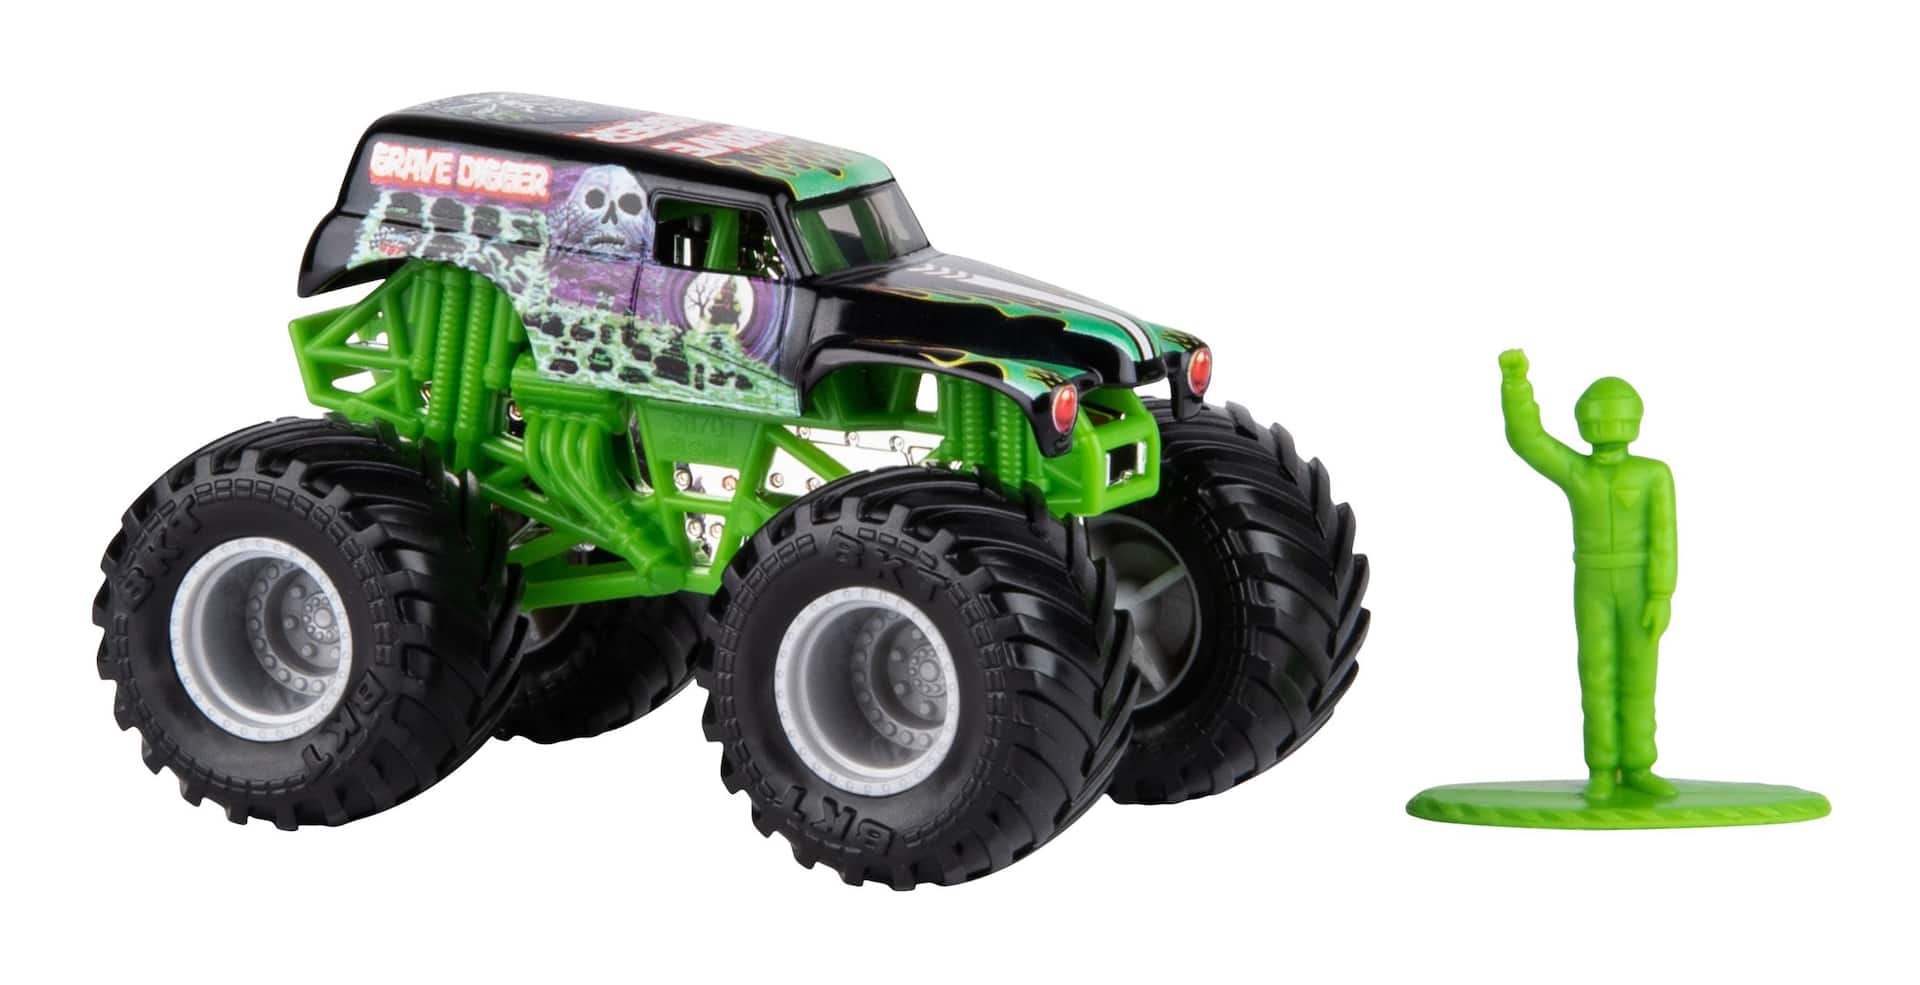  Monster Jam, Power Beasts 4-Pack Monster Trucks (El Toro Loco,  Megalodon, Dragon and Horse Power), 1:64 Scale, Kids Toys for Boy & Girls  Ages 3 and up : Toys & Games